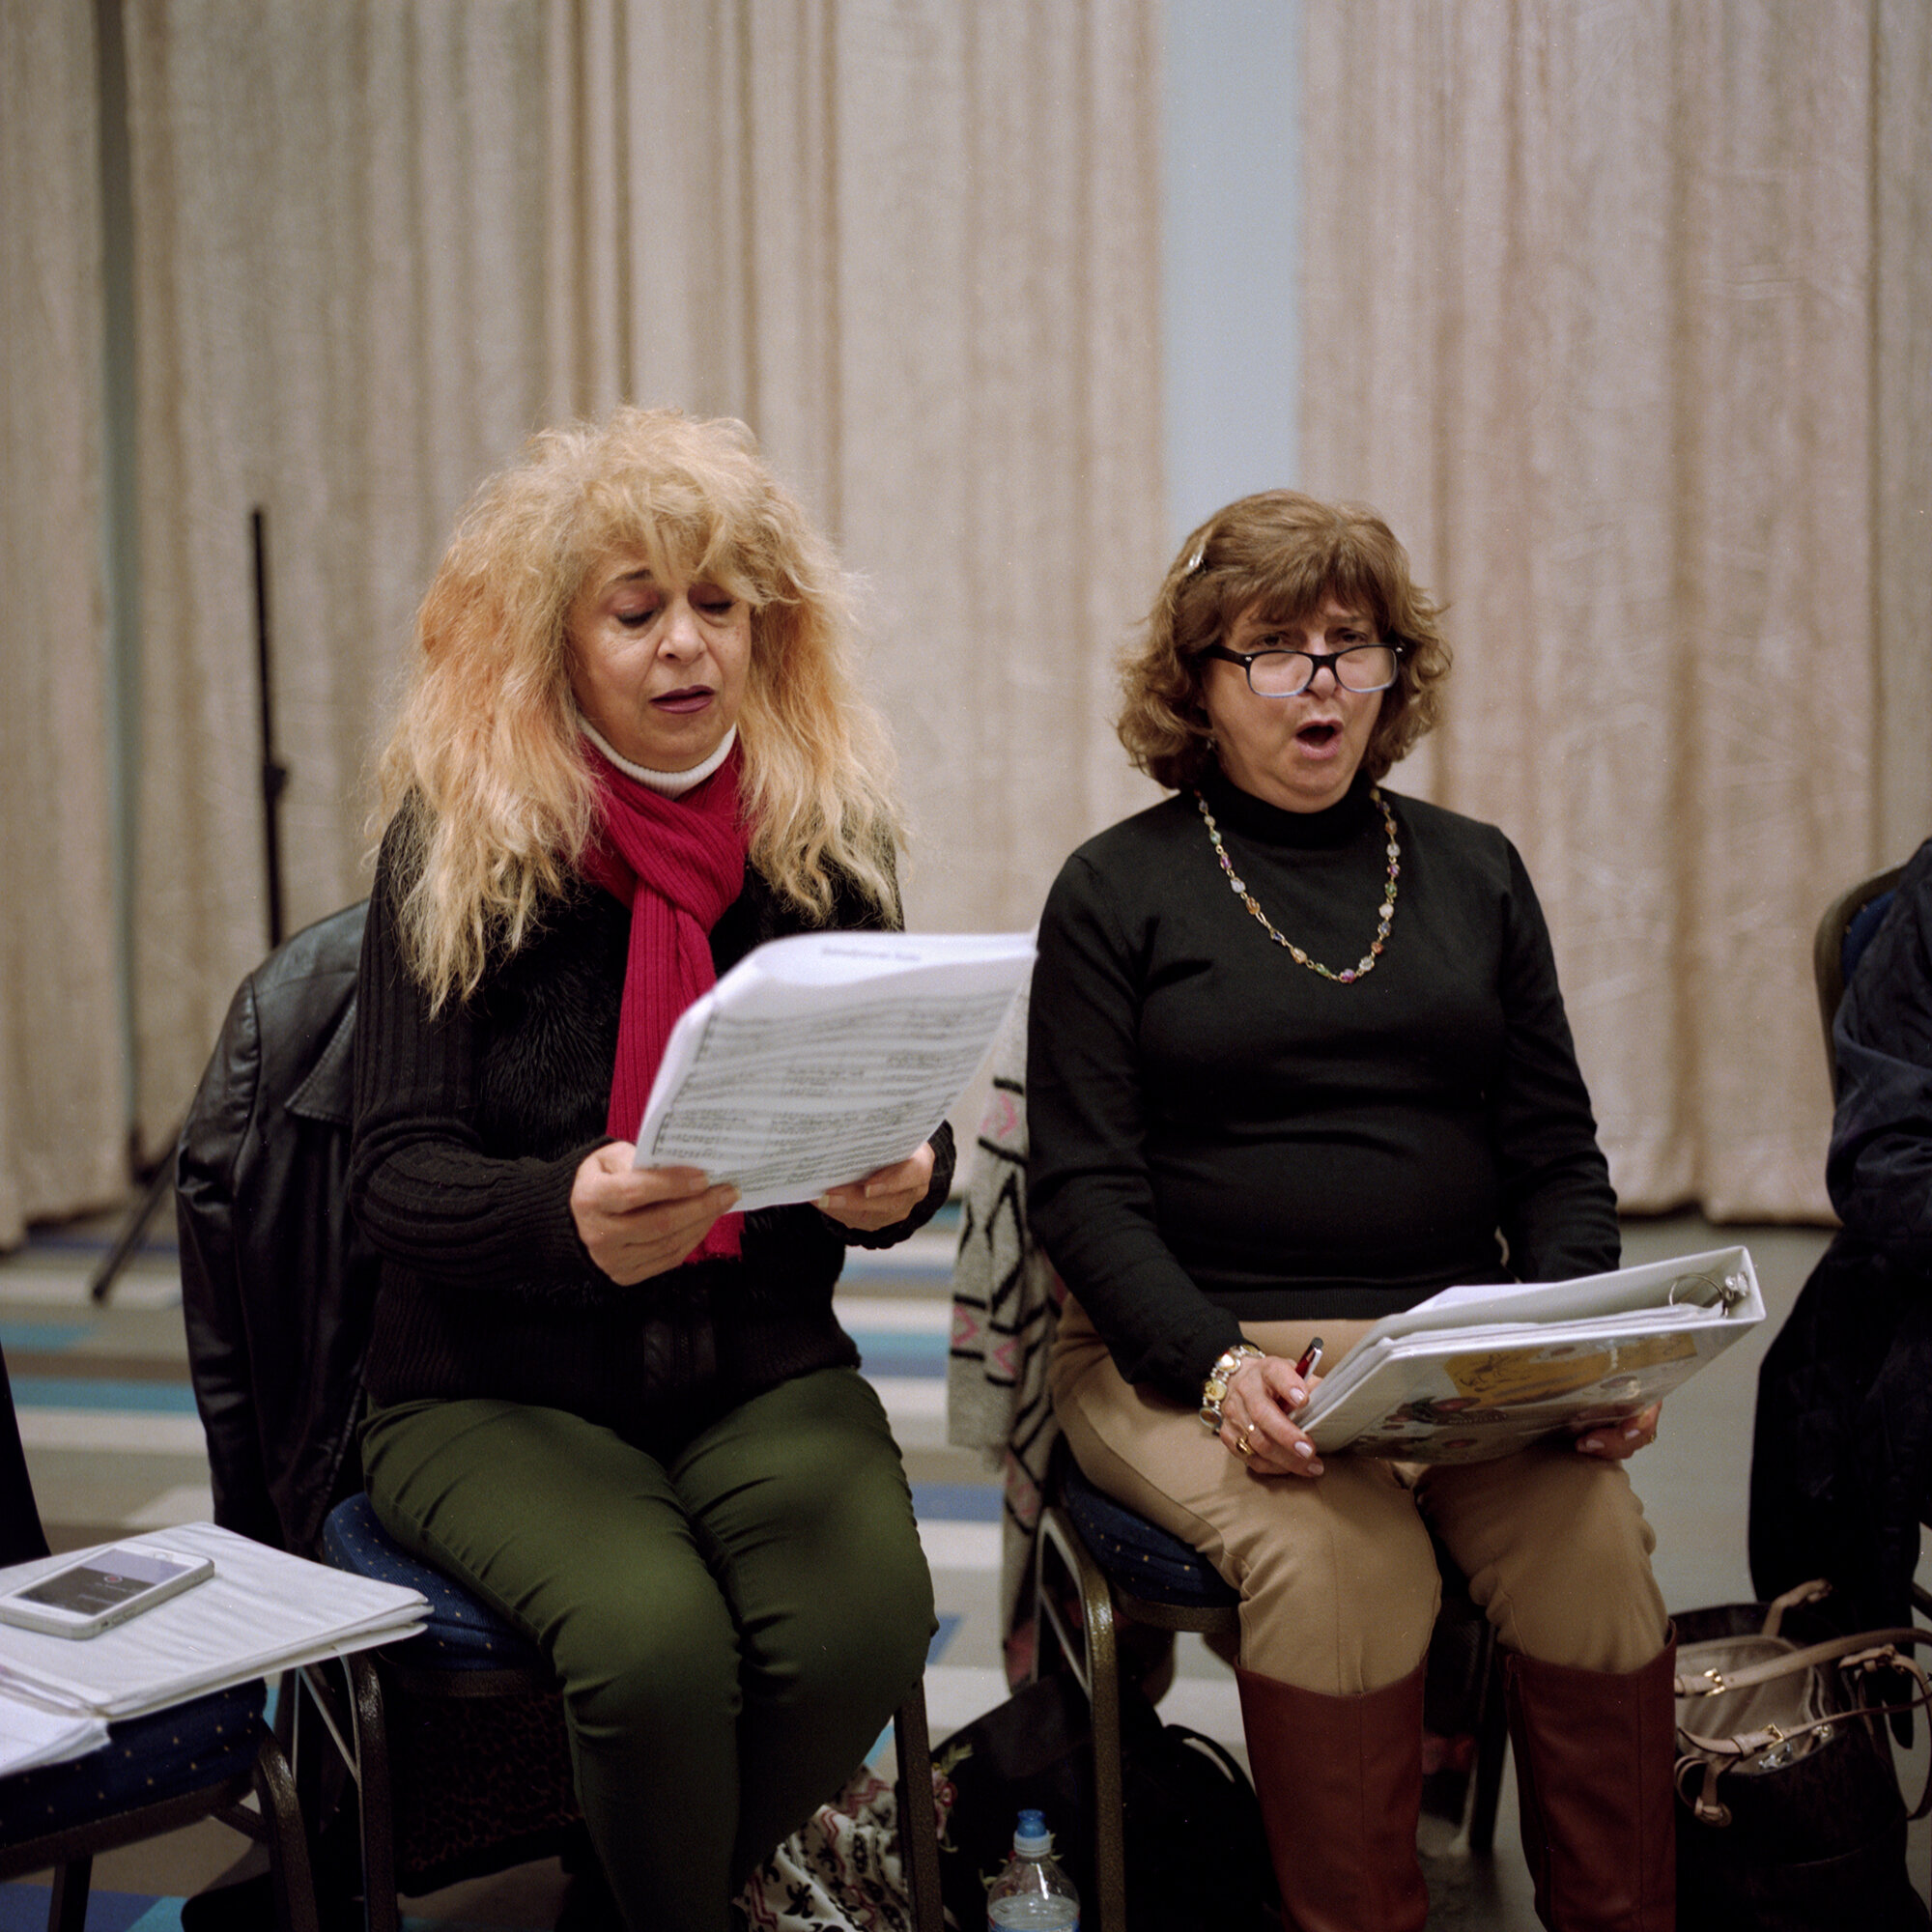  Violet Bohjalian and Linda Hagopian sing during a practice session for an Armenian American choir group in Los Angeles, California. Singing folk songs in choirs is just one of the many ways that Armenian Americans are able to preserve their cultural